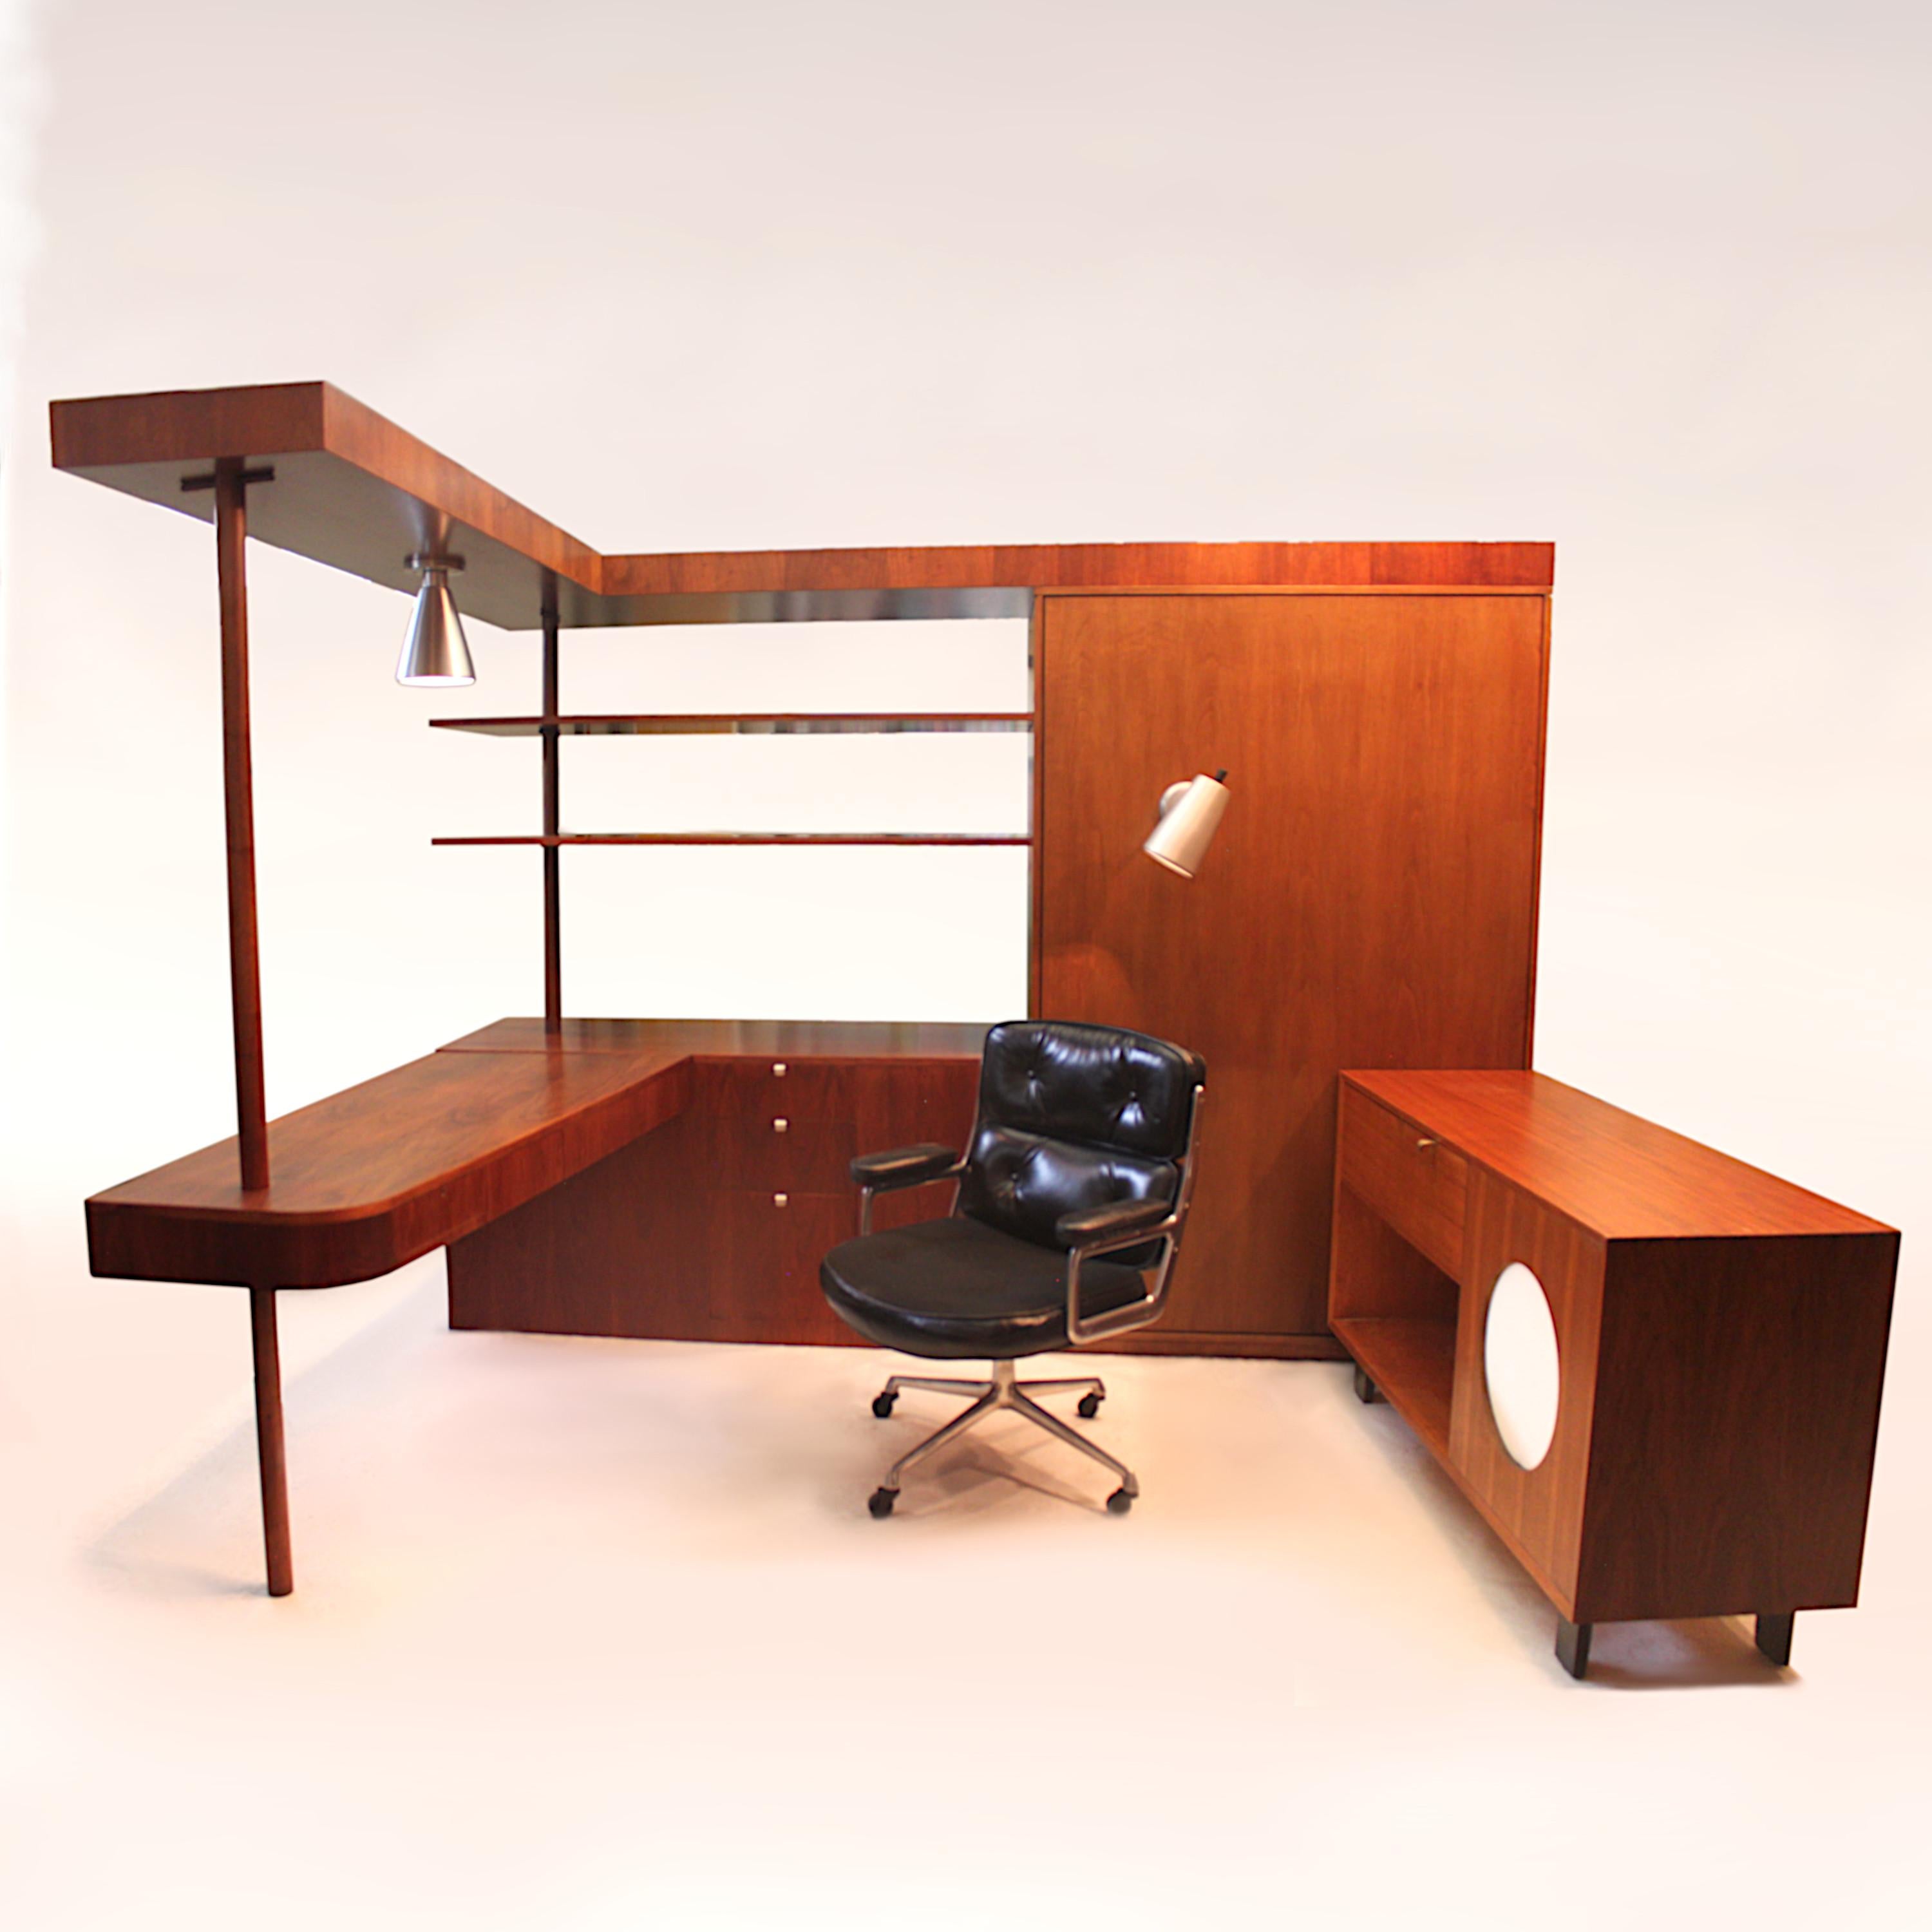 This remarkable piece is a one-off desk/wardrobe/bar/bookcase/storage cabinet custom-designed by George Nelson in 1949 to match his Basic Cabinet Series (BCS) for Herman Miller. The desk was made specifically for a client in the Promontory Apartment